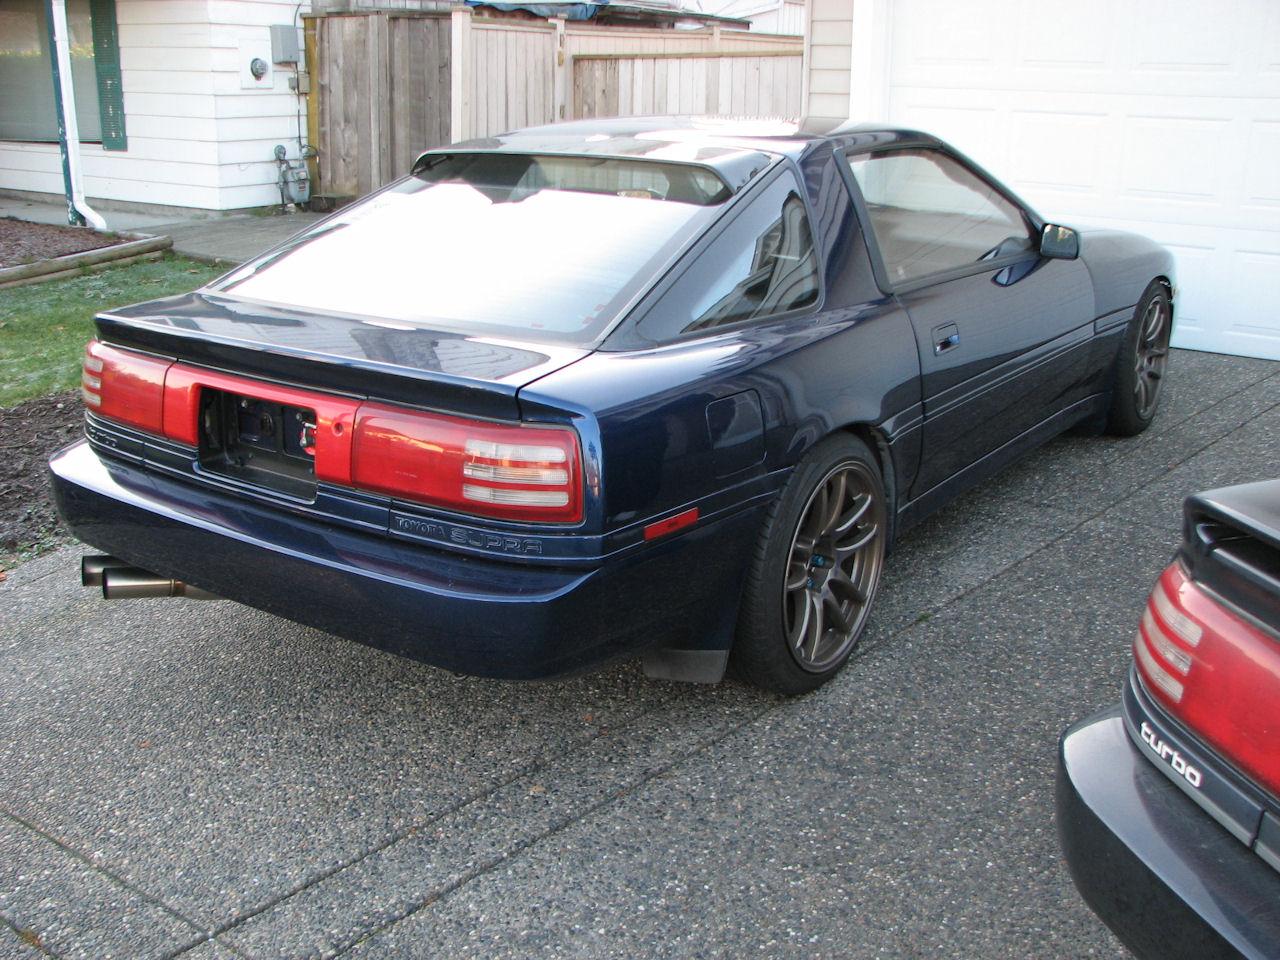 As of this morning, I'm currently the owner of 2 Mk3 Supras. 